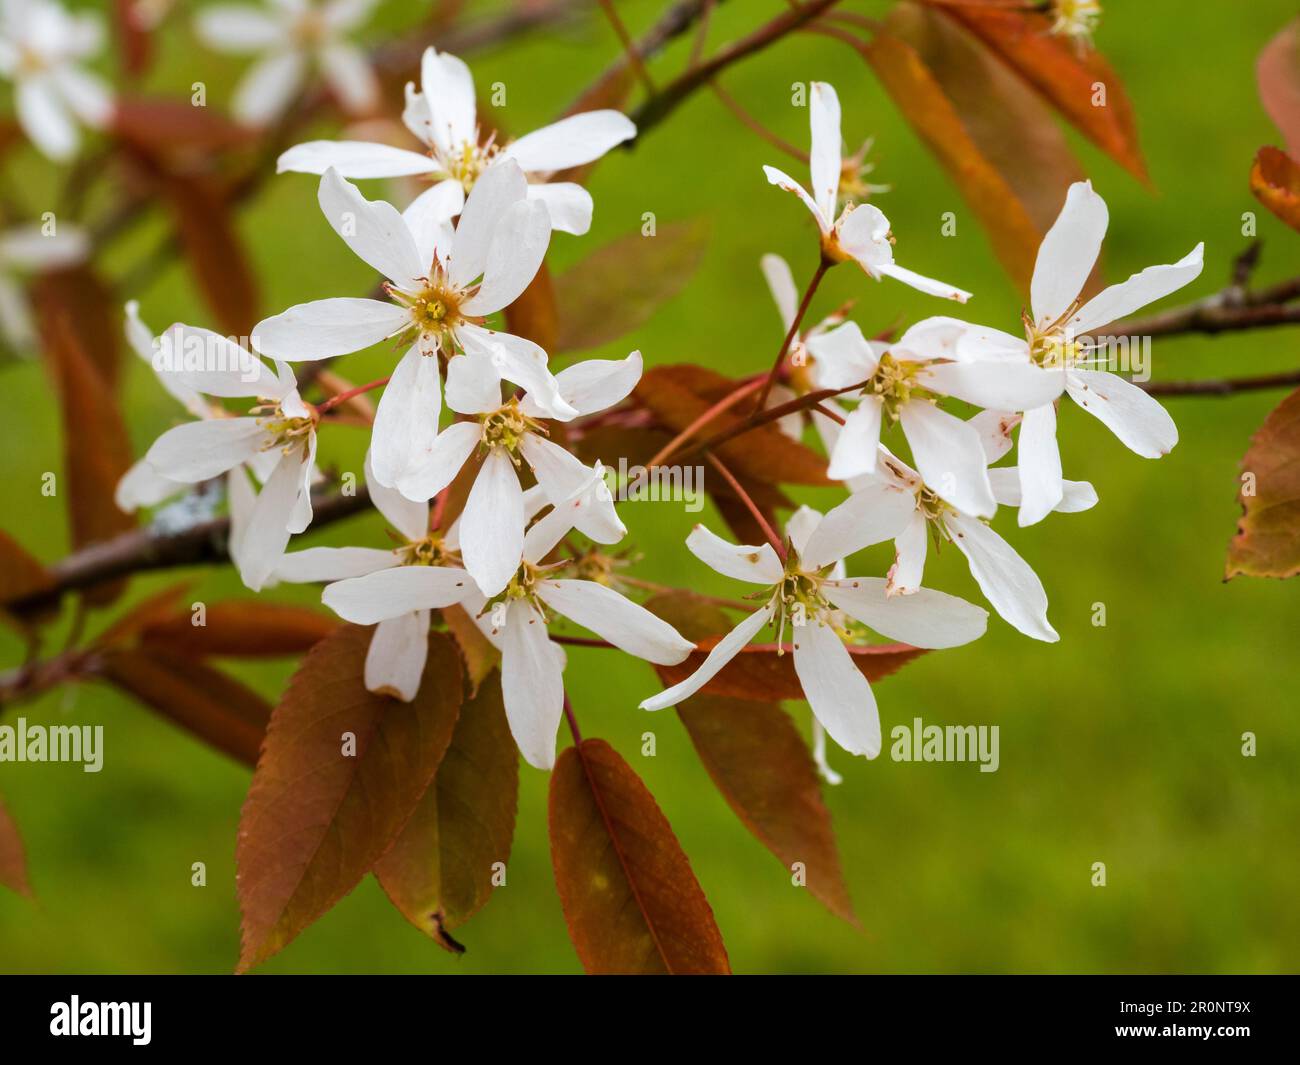 Bronze spring foliage and white flowers of the hardy serviceberry tree, Amelanchier x grandiflora 'Robin Hill' Stock Photo